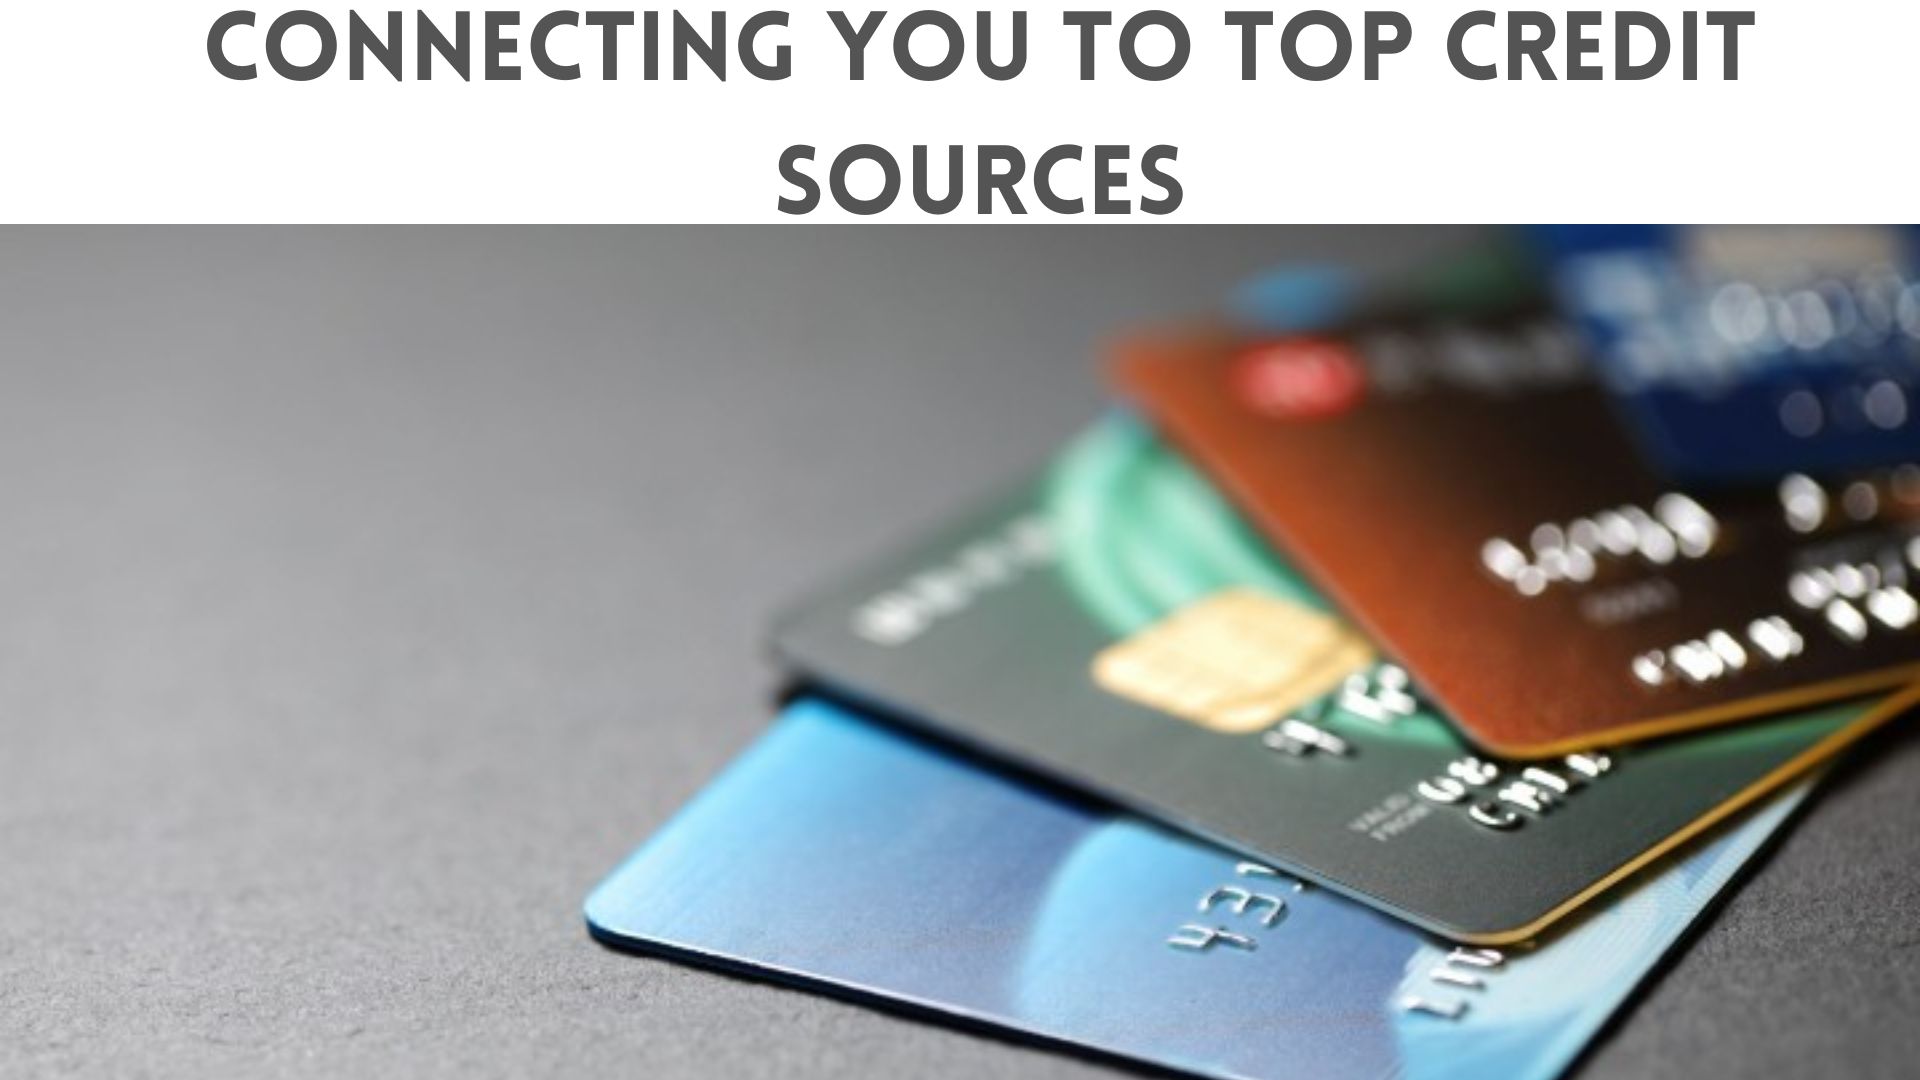 Connecting You to Top Credit Sources